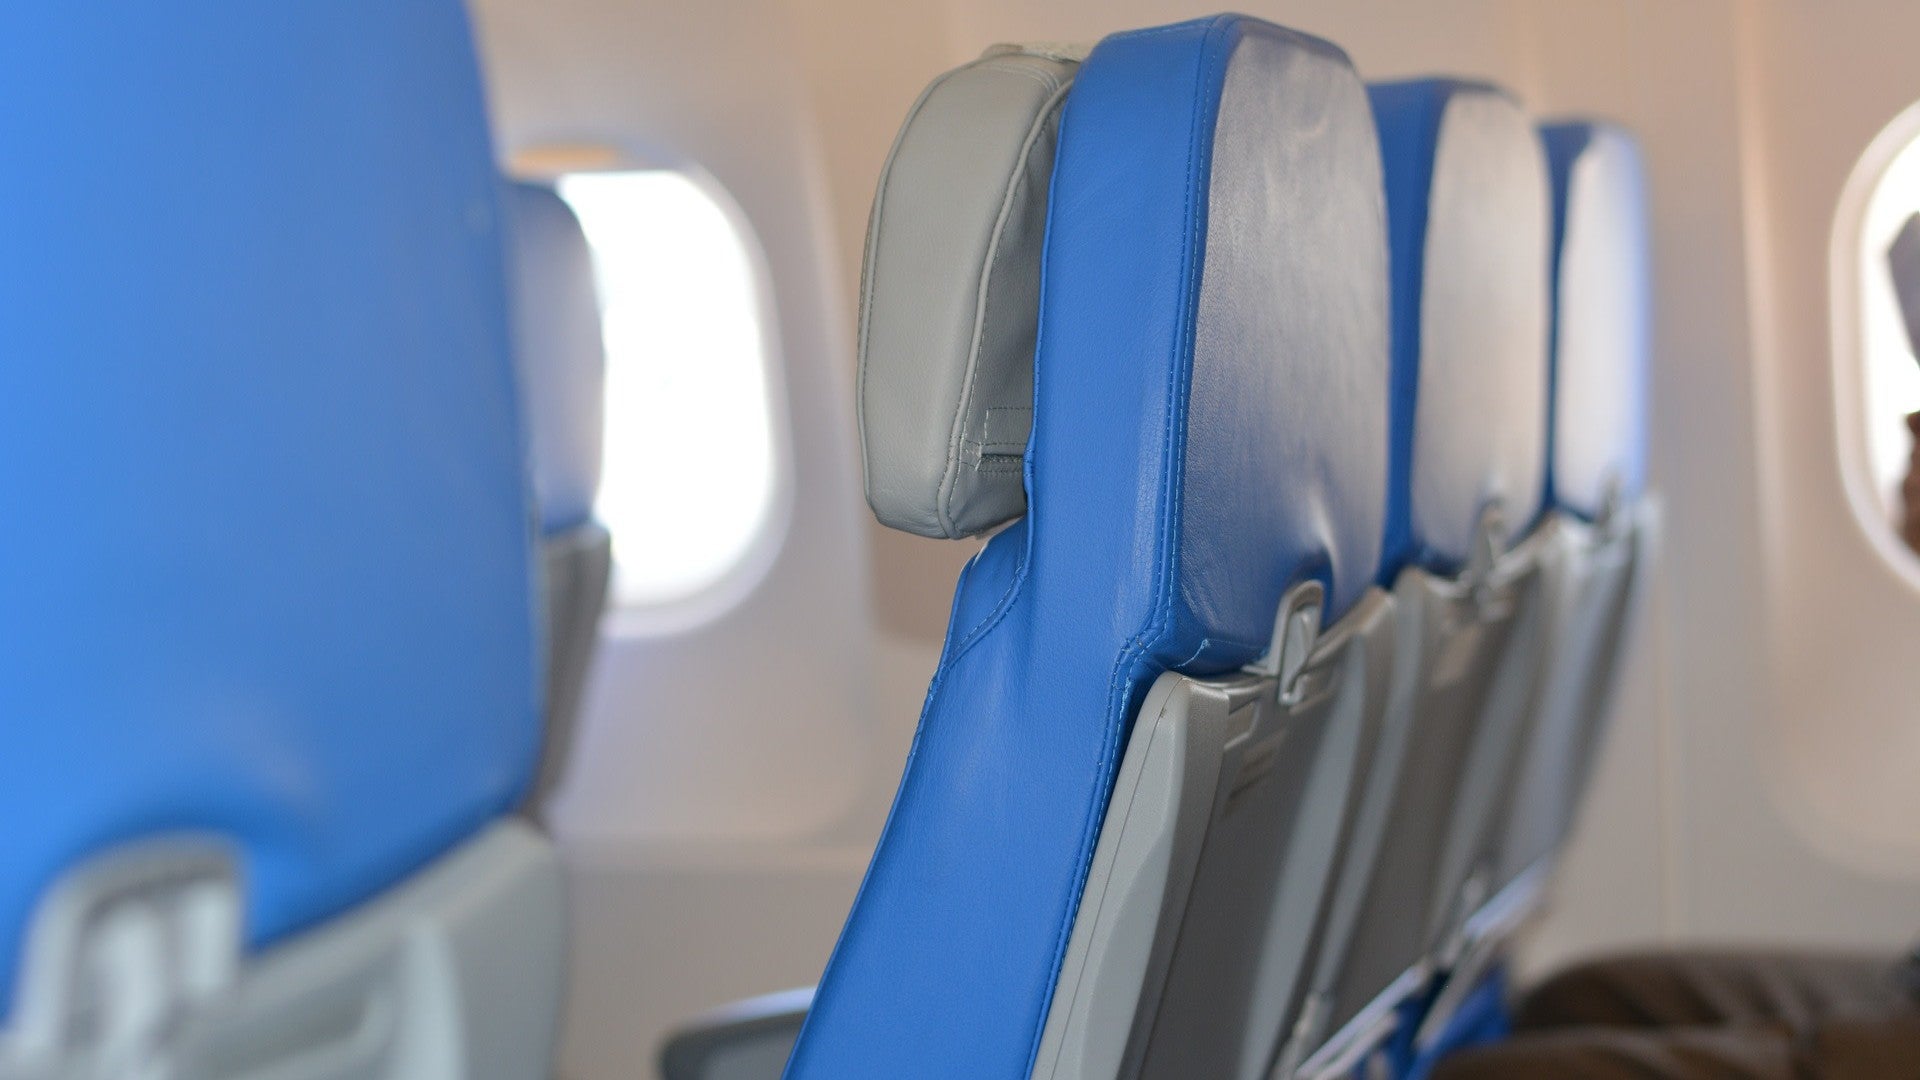 Score An Upgrade By Obsessively Checking Seats Before A Flight